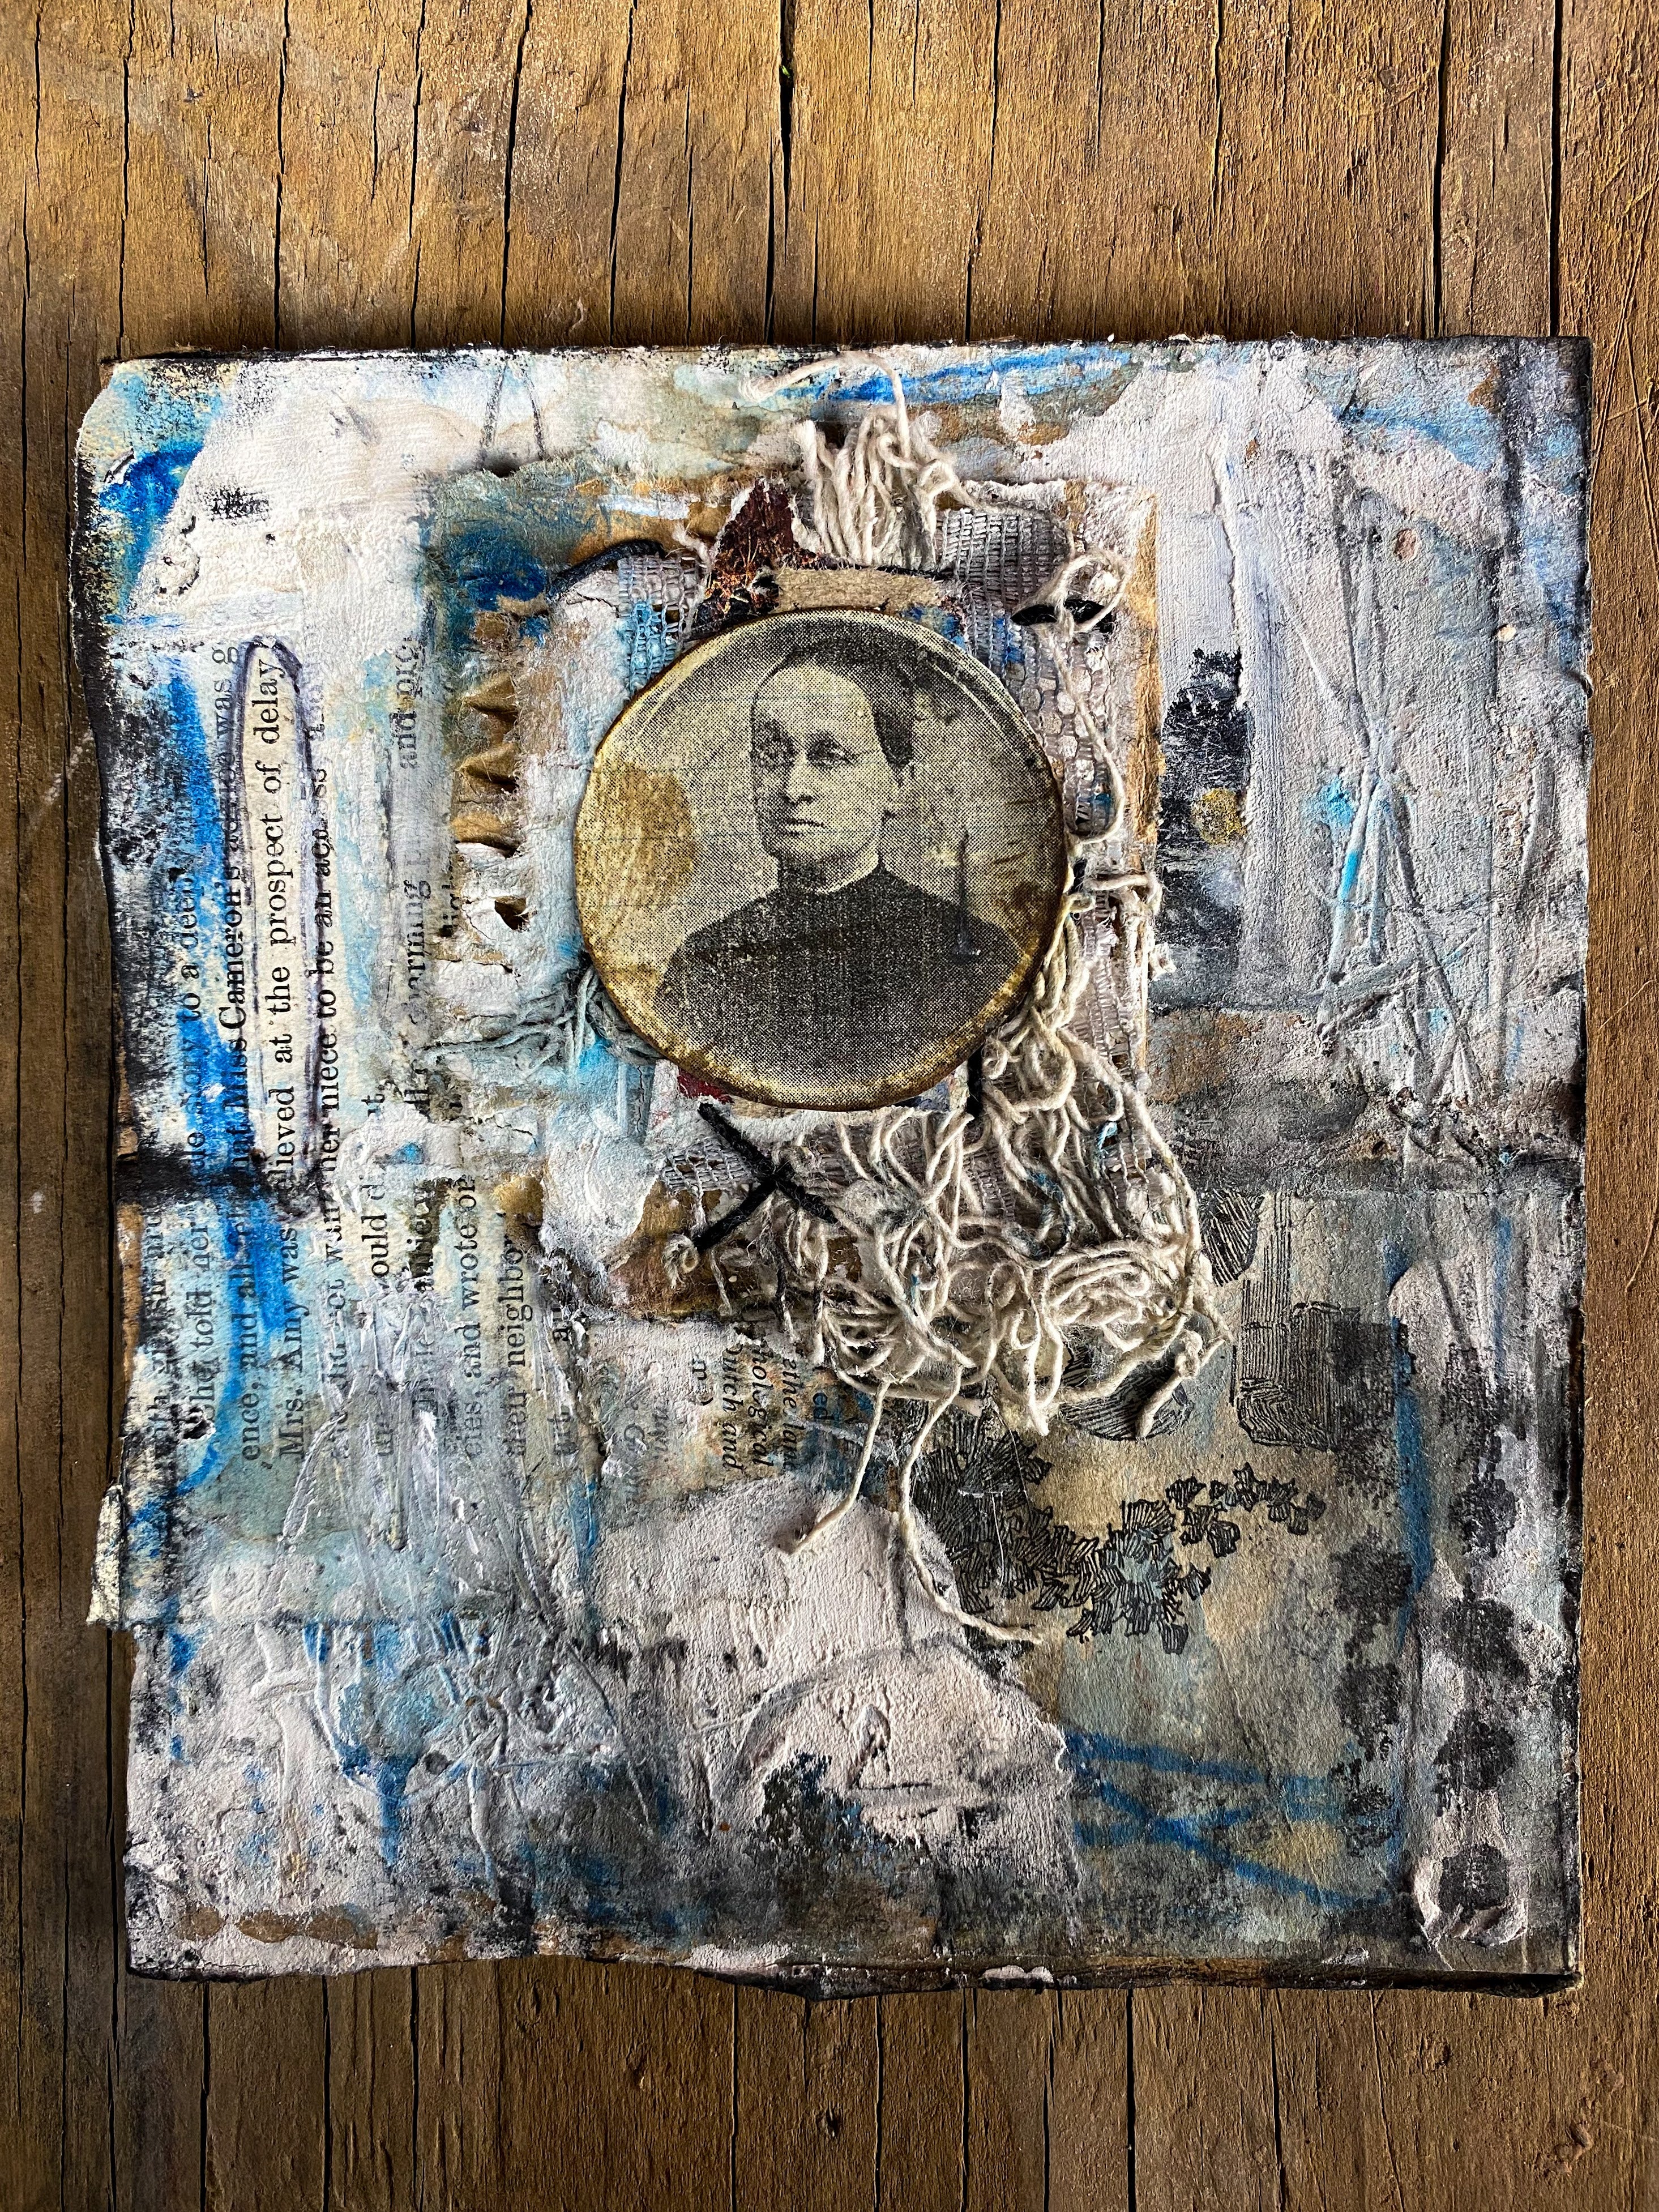 The Prospect of Delay - Original Mixed Media Collage